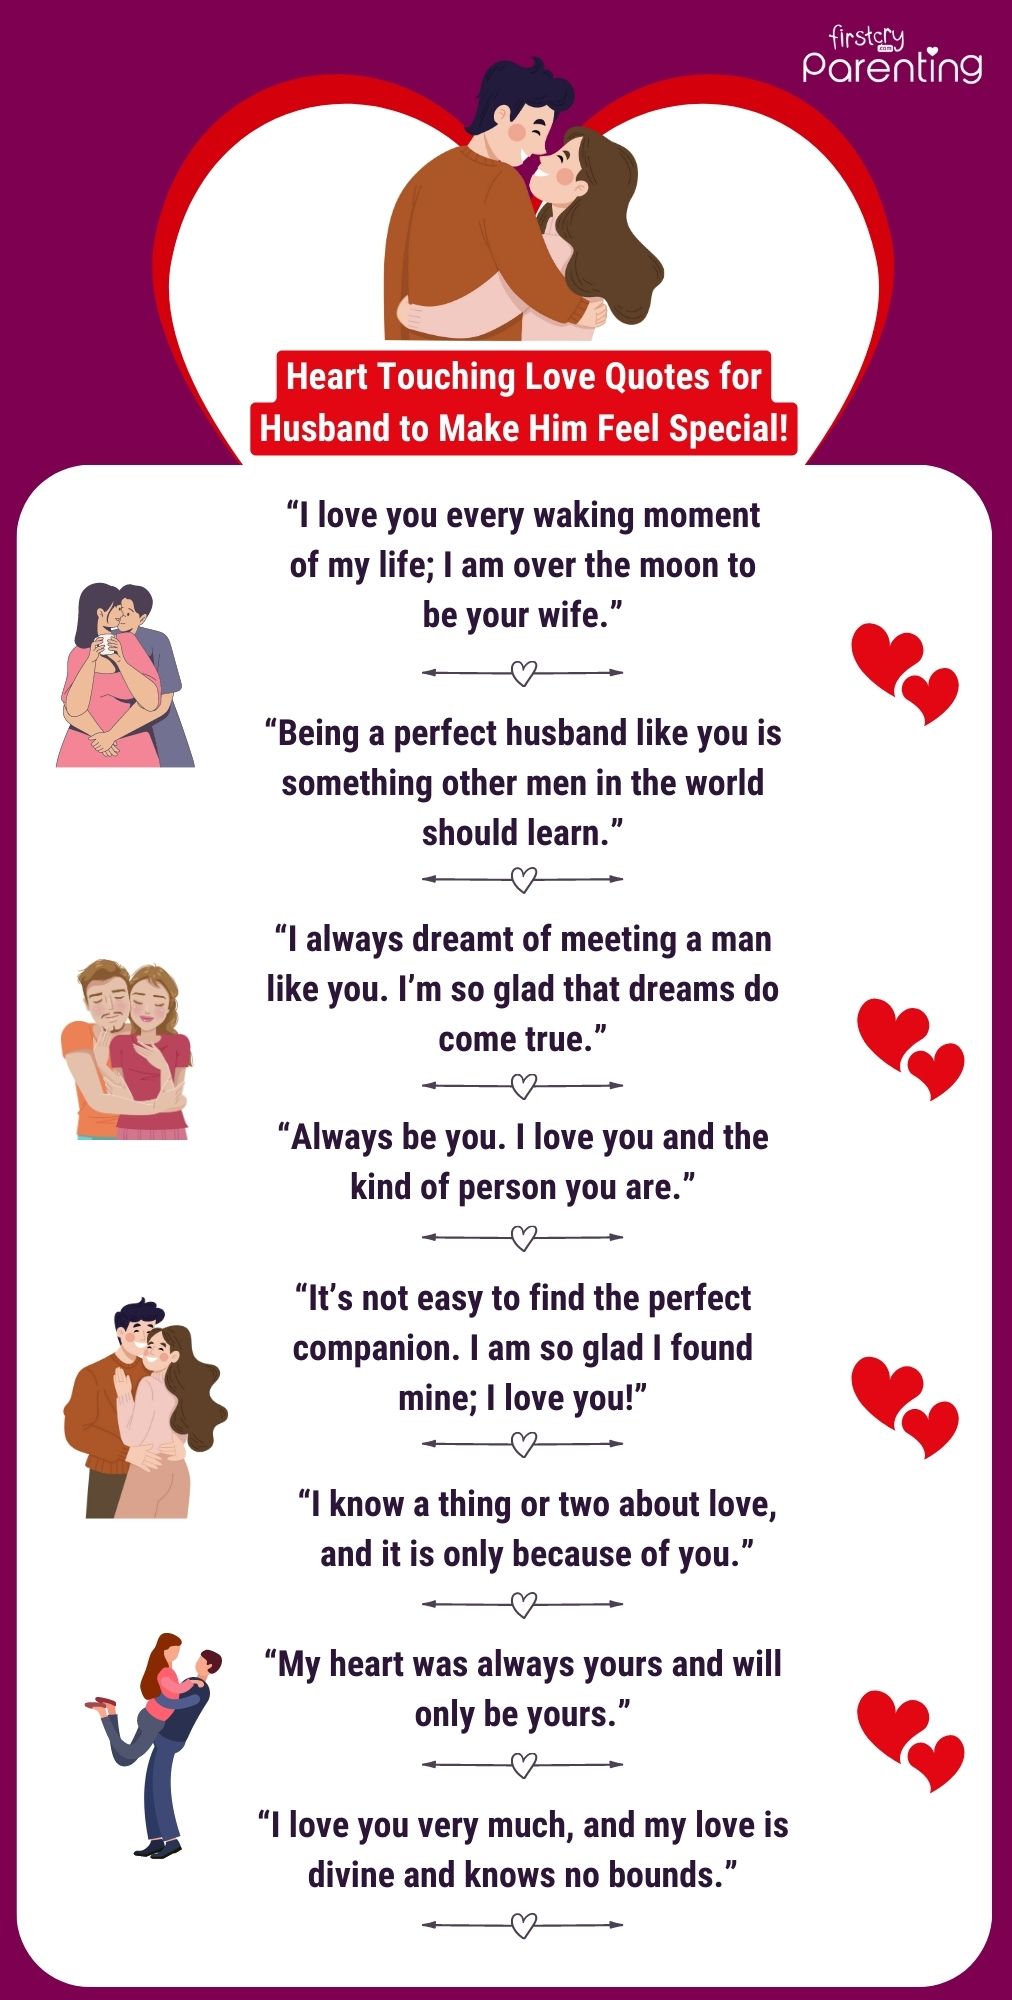 Heart touching Love Quotes for Husband to Make Him Feel Special - Infographic